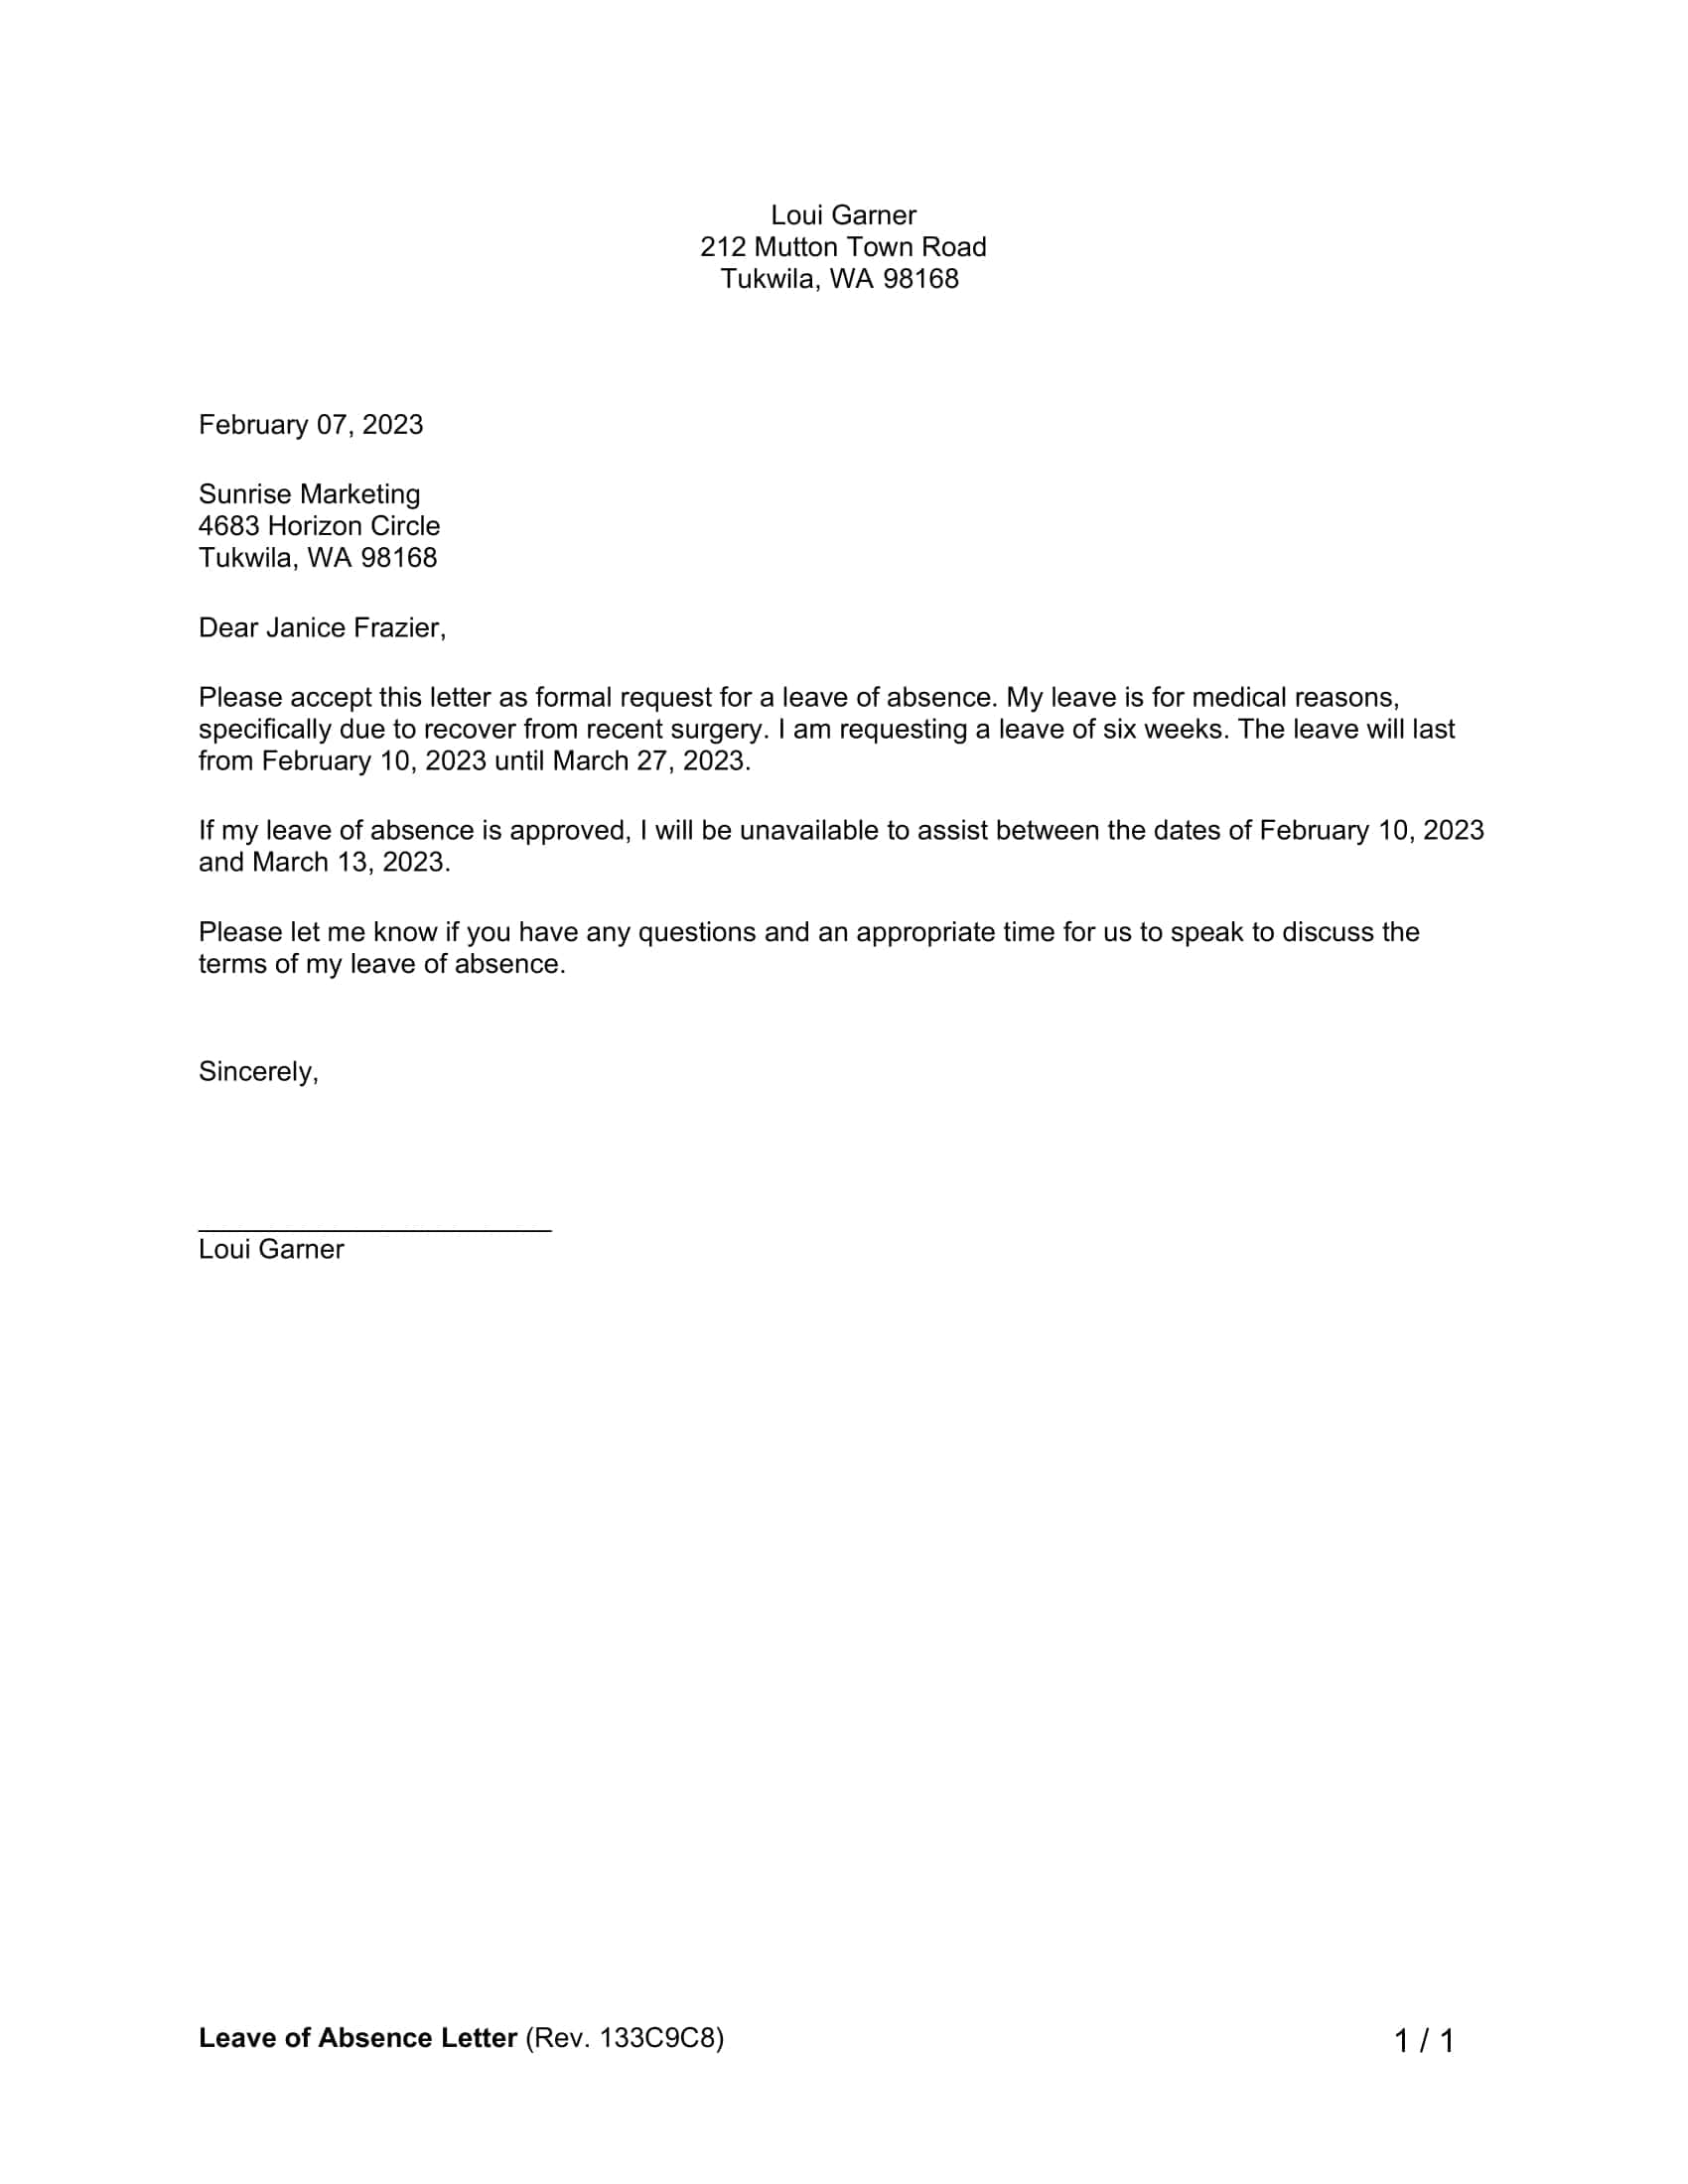 Leave of absence letter example